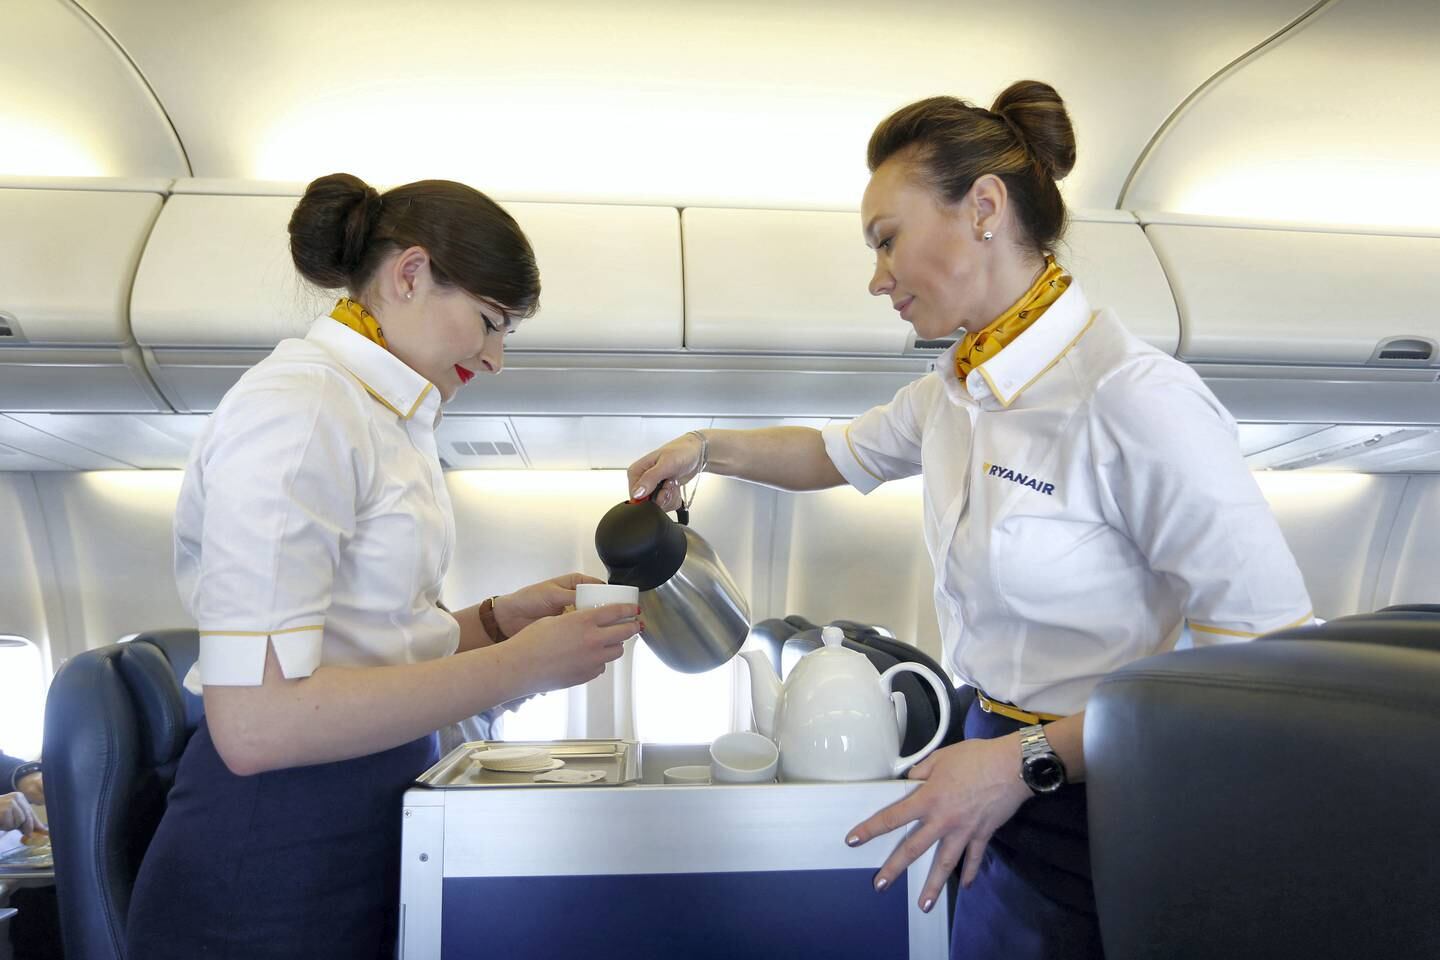 Air stewardesses serve coffee in the cabin of the Ryanair Holdings Plc corporate jet during a flight to Dublin, Ireland, on Tuesday, April 12, 2016. Ryanair attracted more than 100 million travelers for the first time in 2015 and is set to overtake EasyJet Plc as the biggest airline operating in the U.K., with a total of 41 million passengers forecast this year, chief executive officer Michael O'Leary said. Photographer: Luke MacGregor/Bloomberg